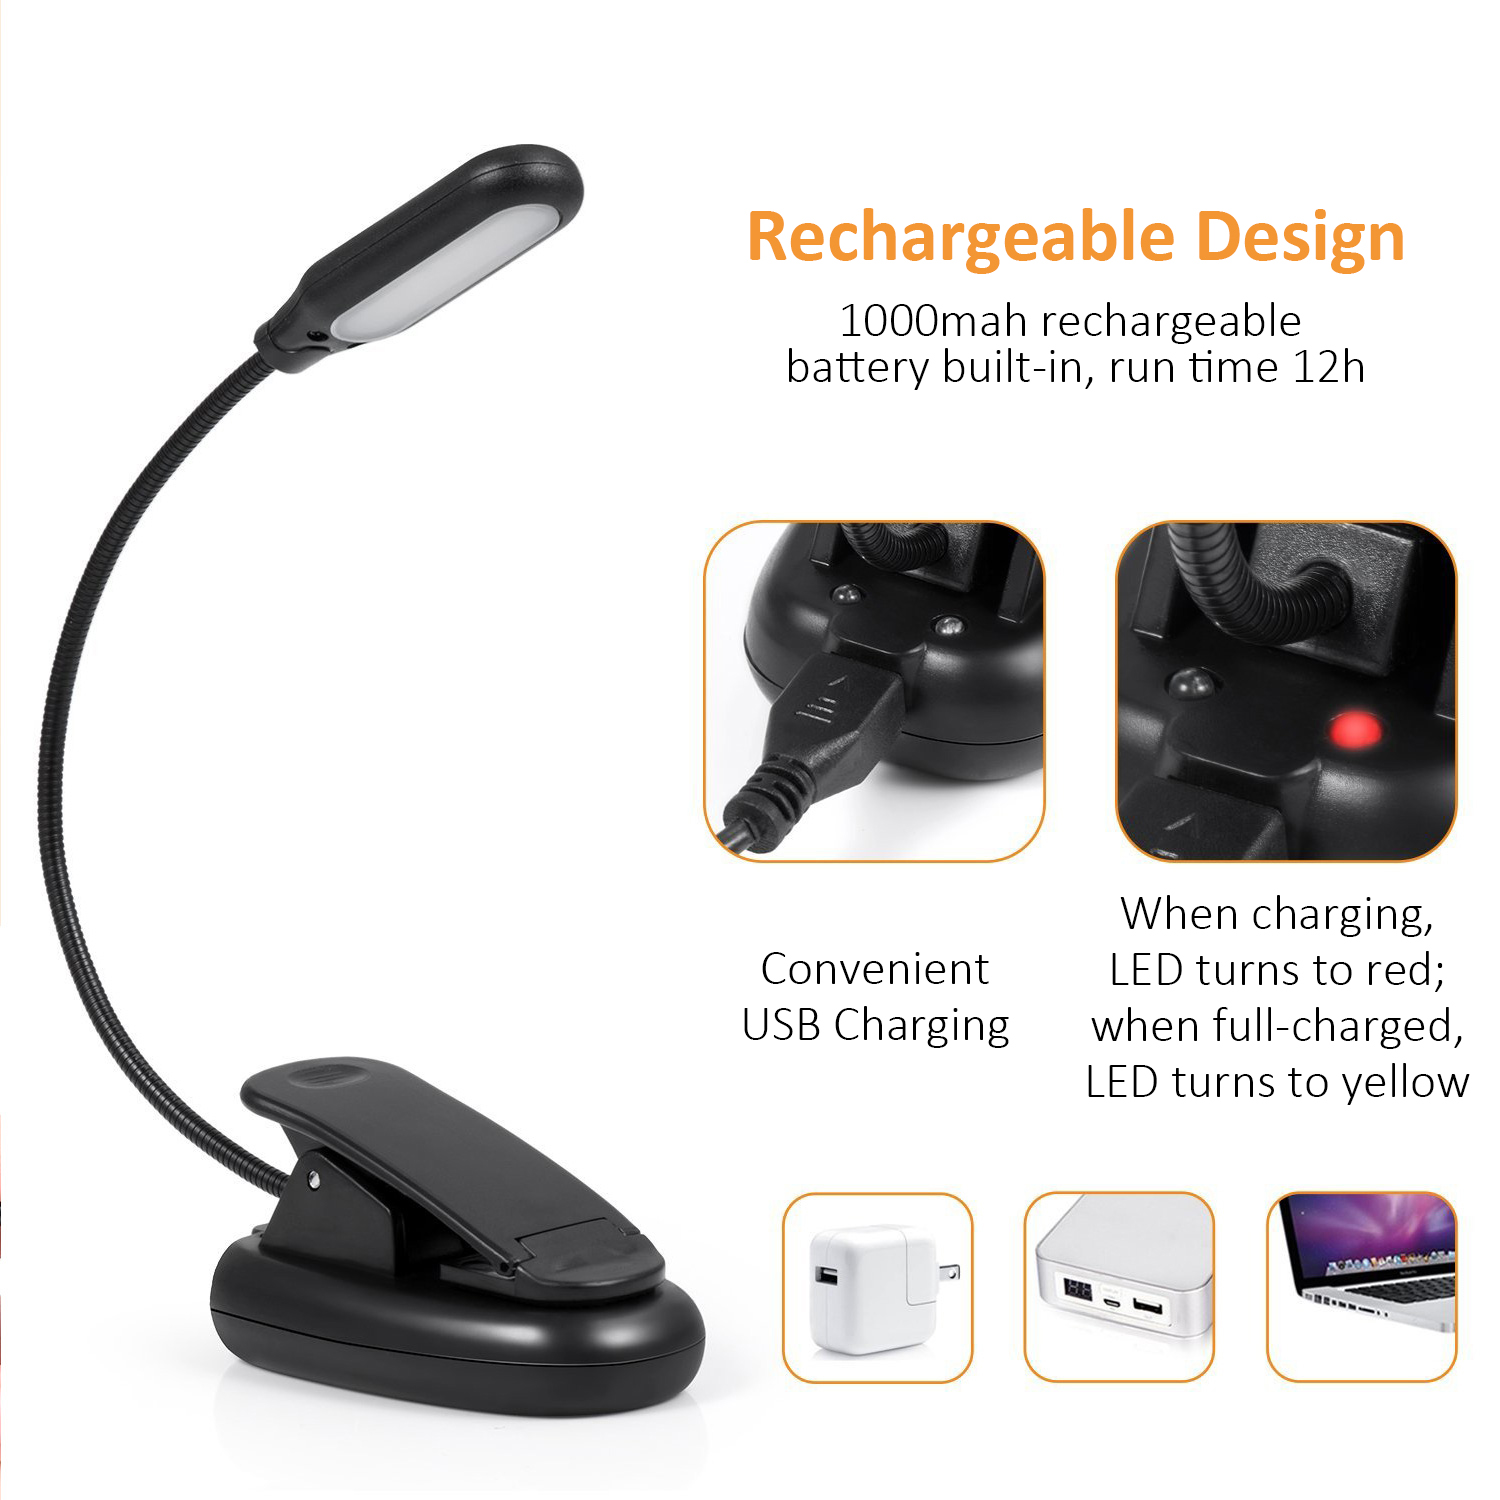 VCAN Dimmable Flexible Reading Book Light 